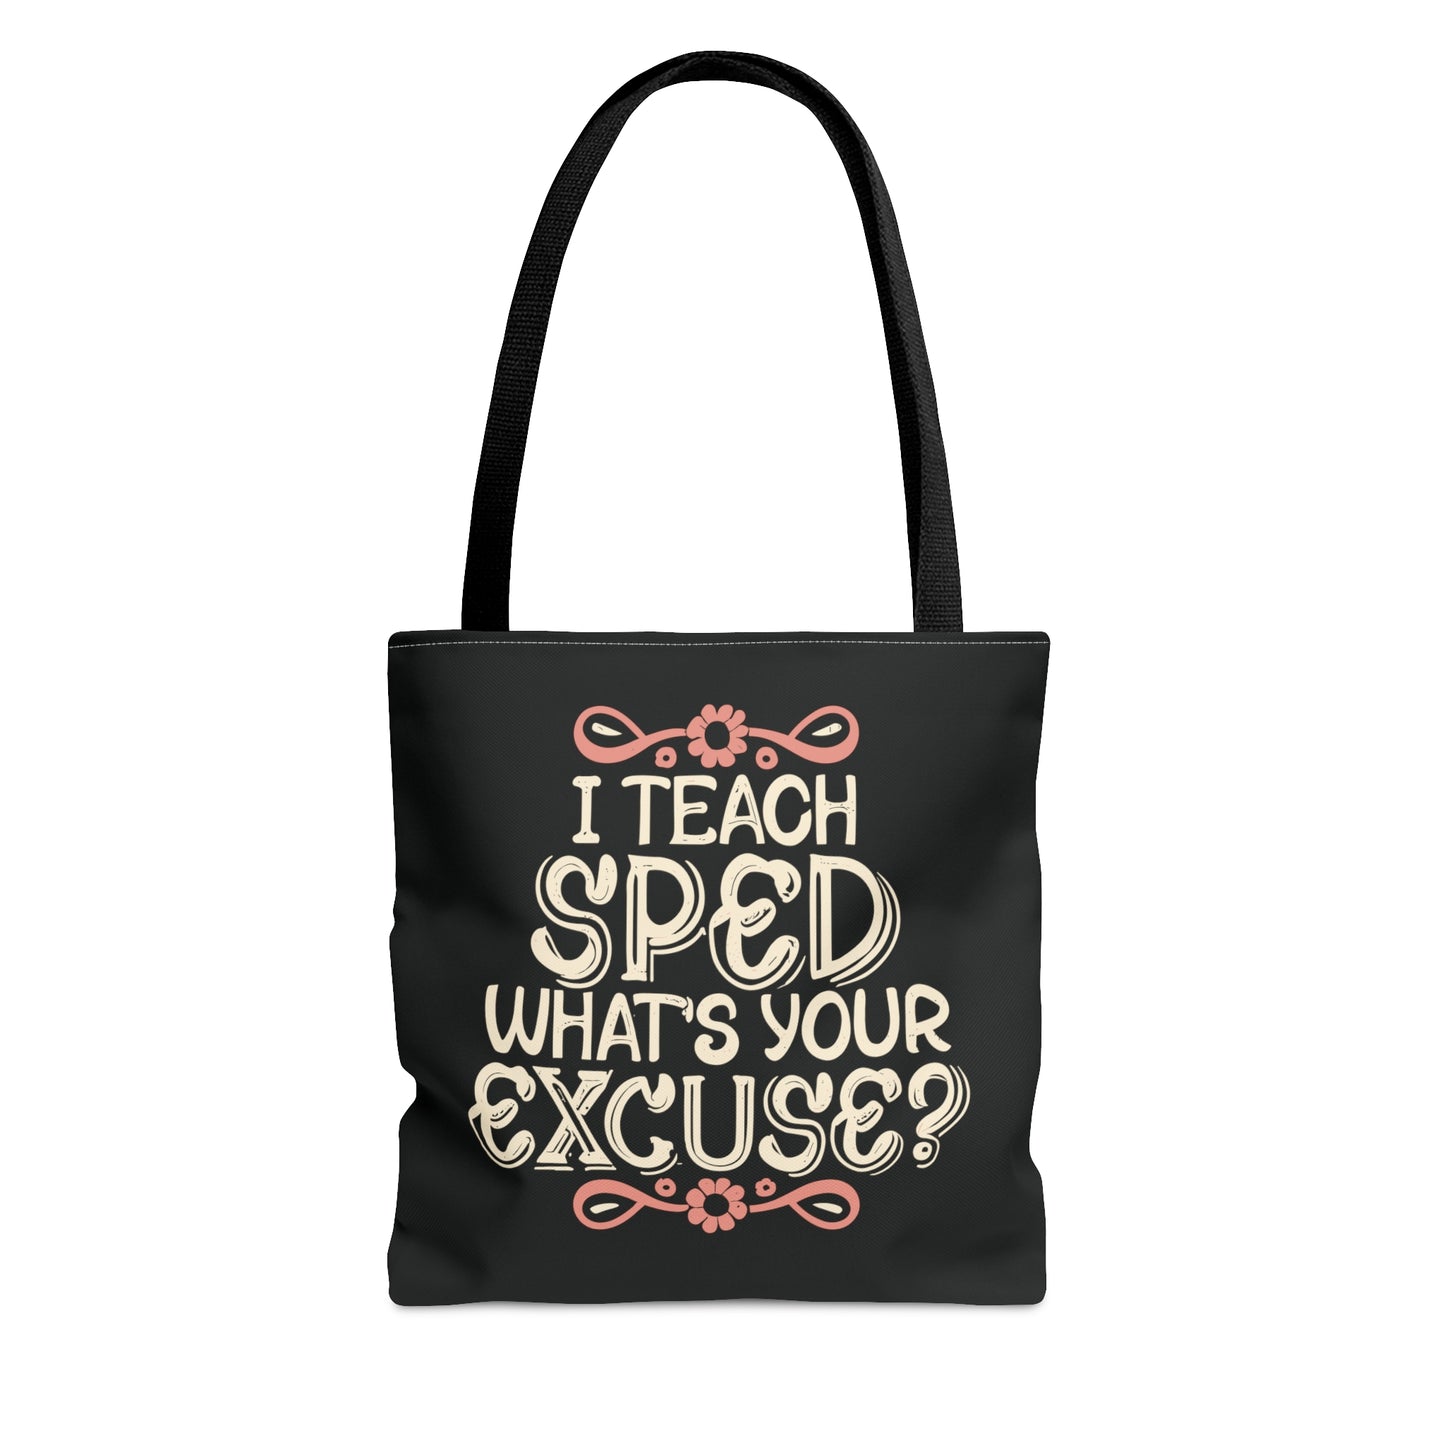 Special Ed Teacher Tote Bag - "I Teach SPED - What's Your Excuse"